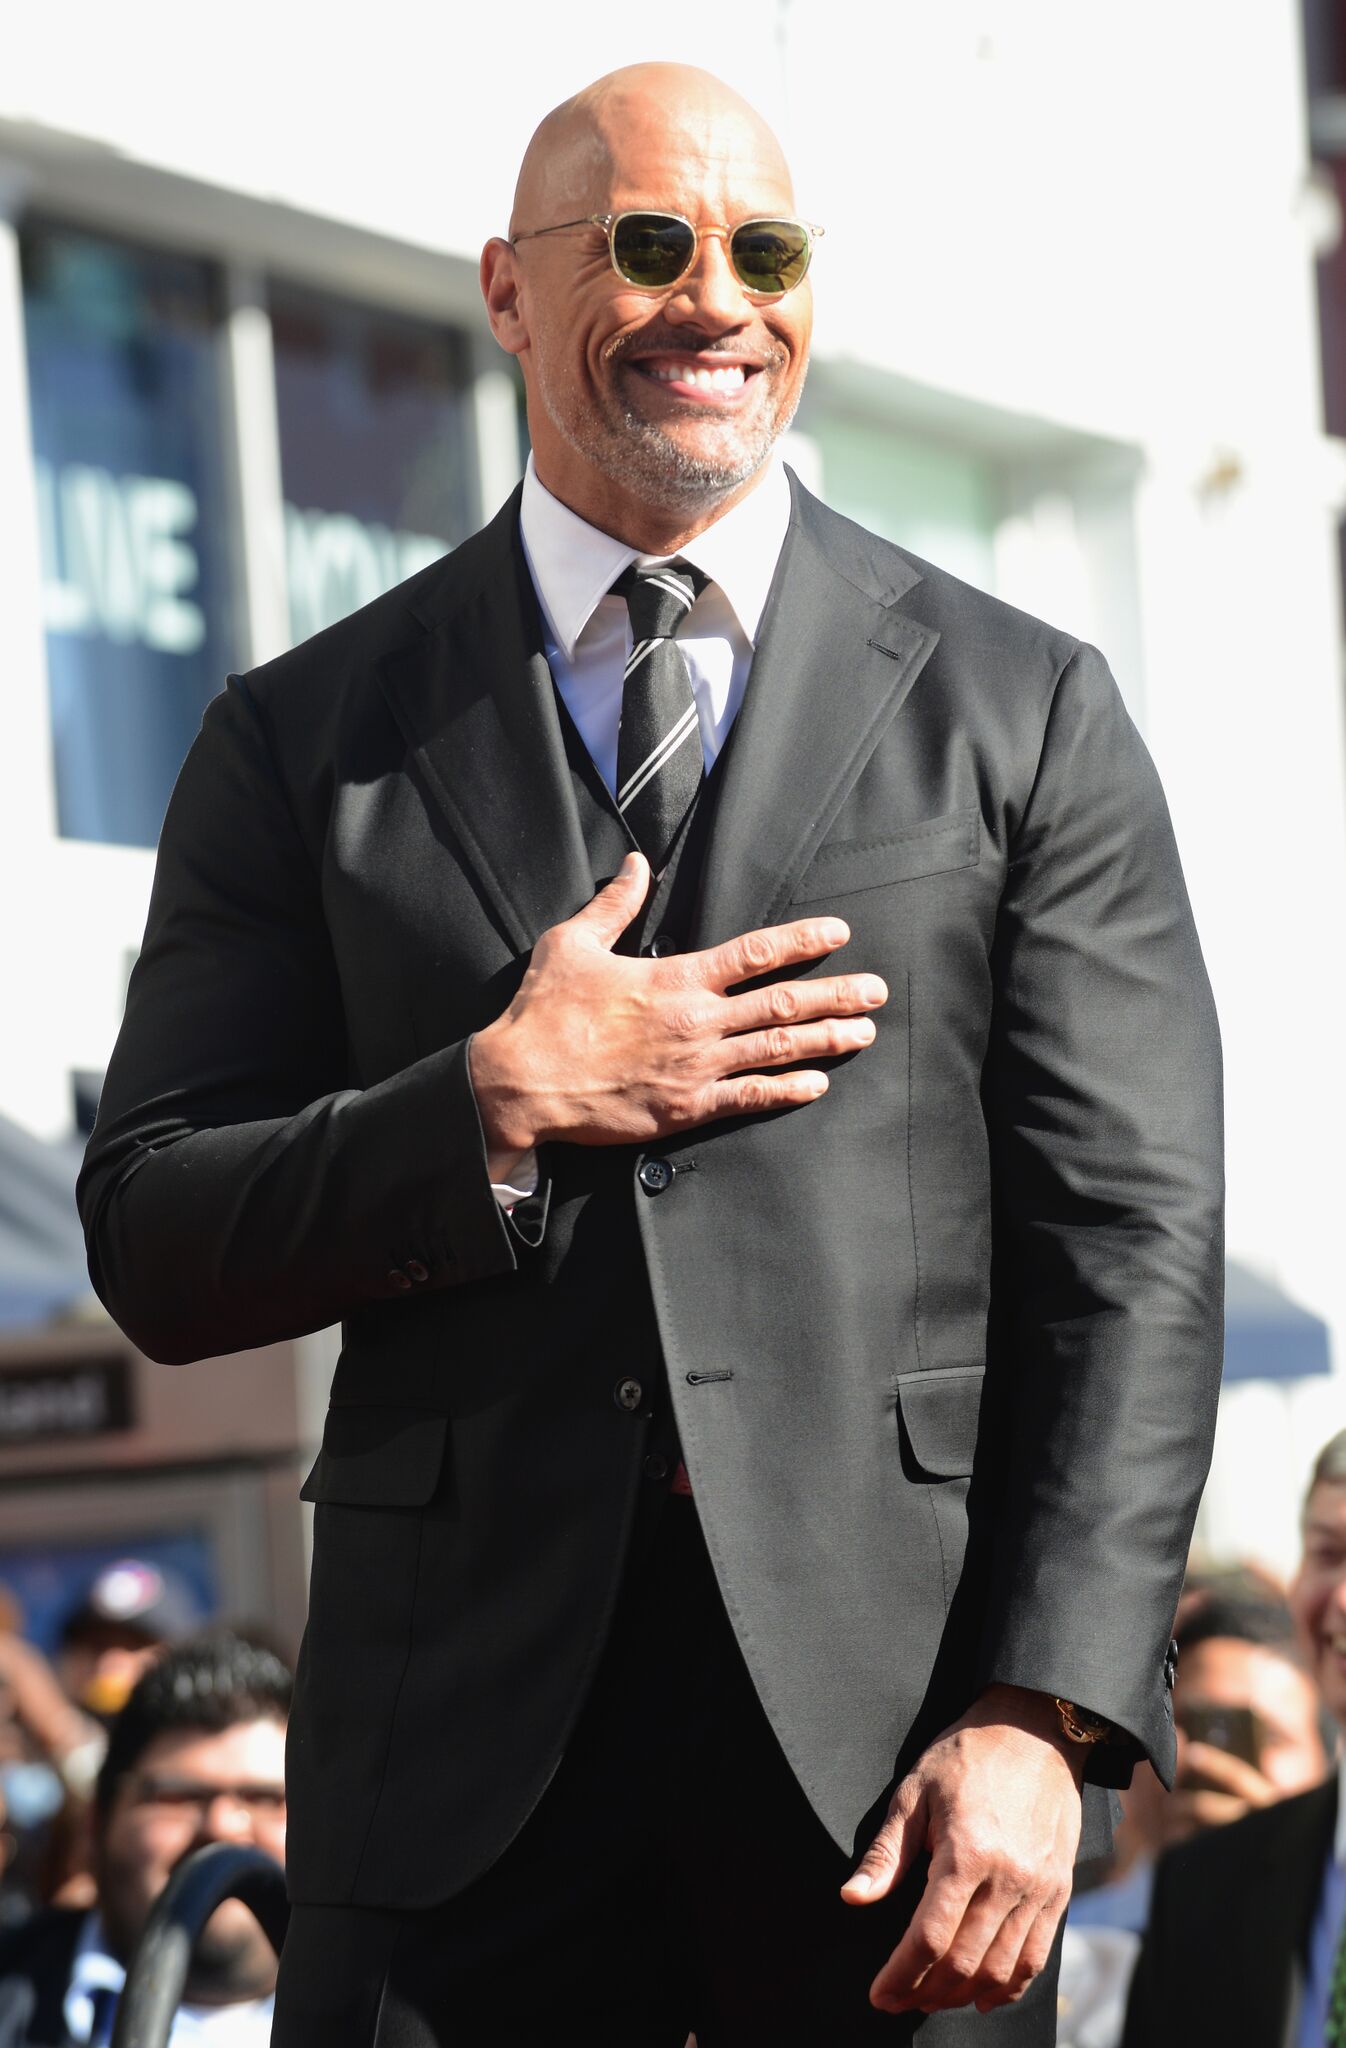 Dwayne Johnson Honored With Star On The Hollywood Walk Of Fame | Getty Images